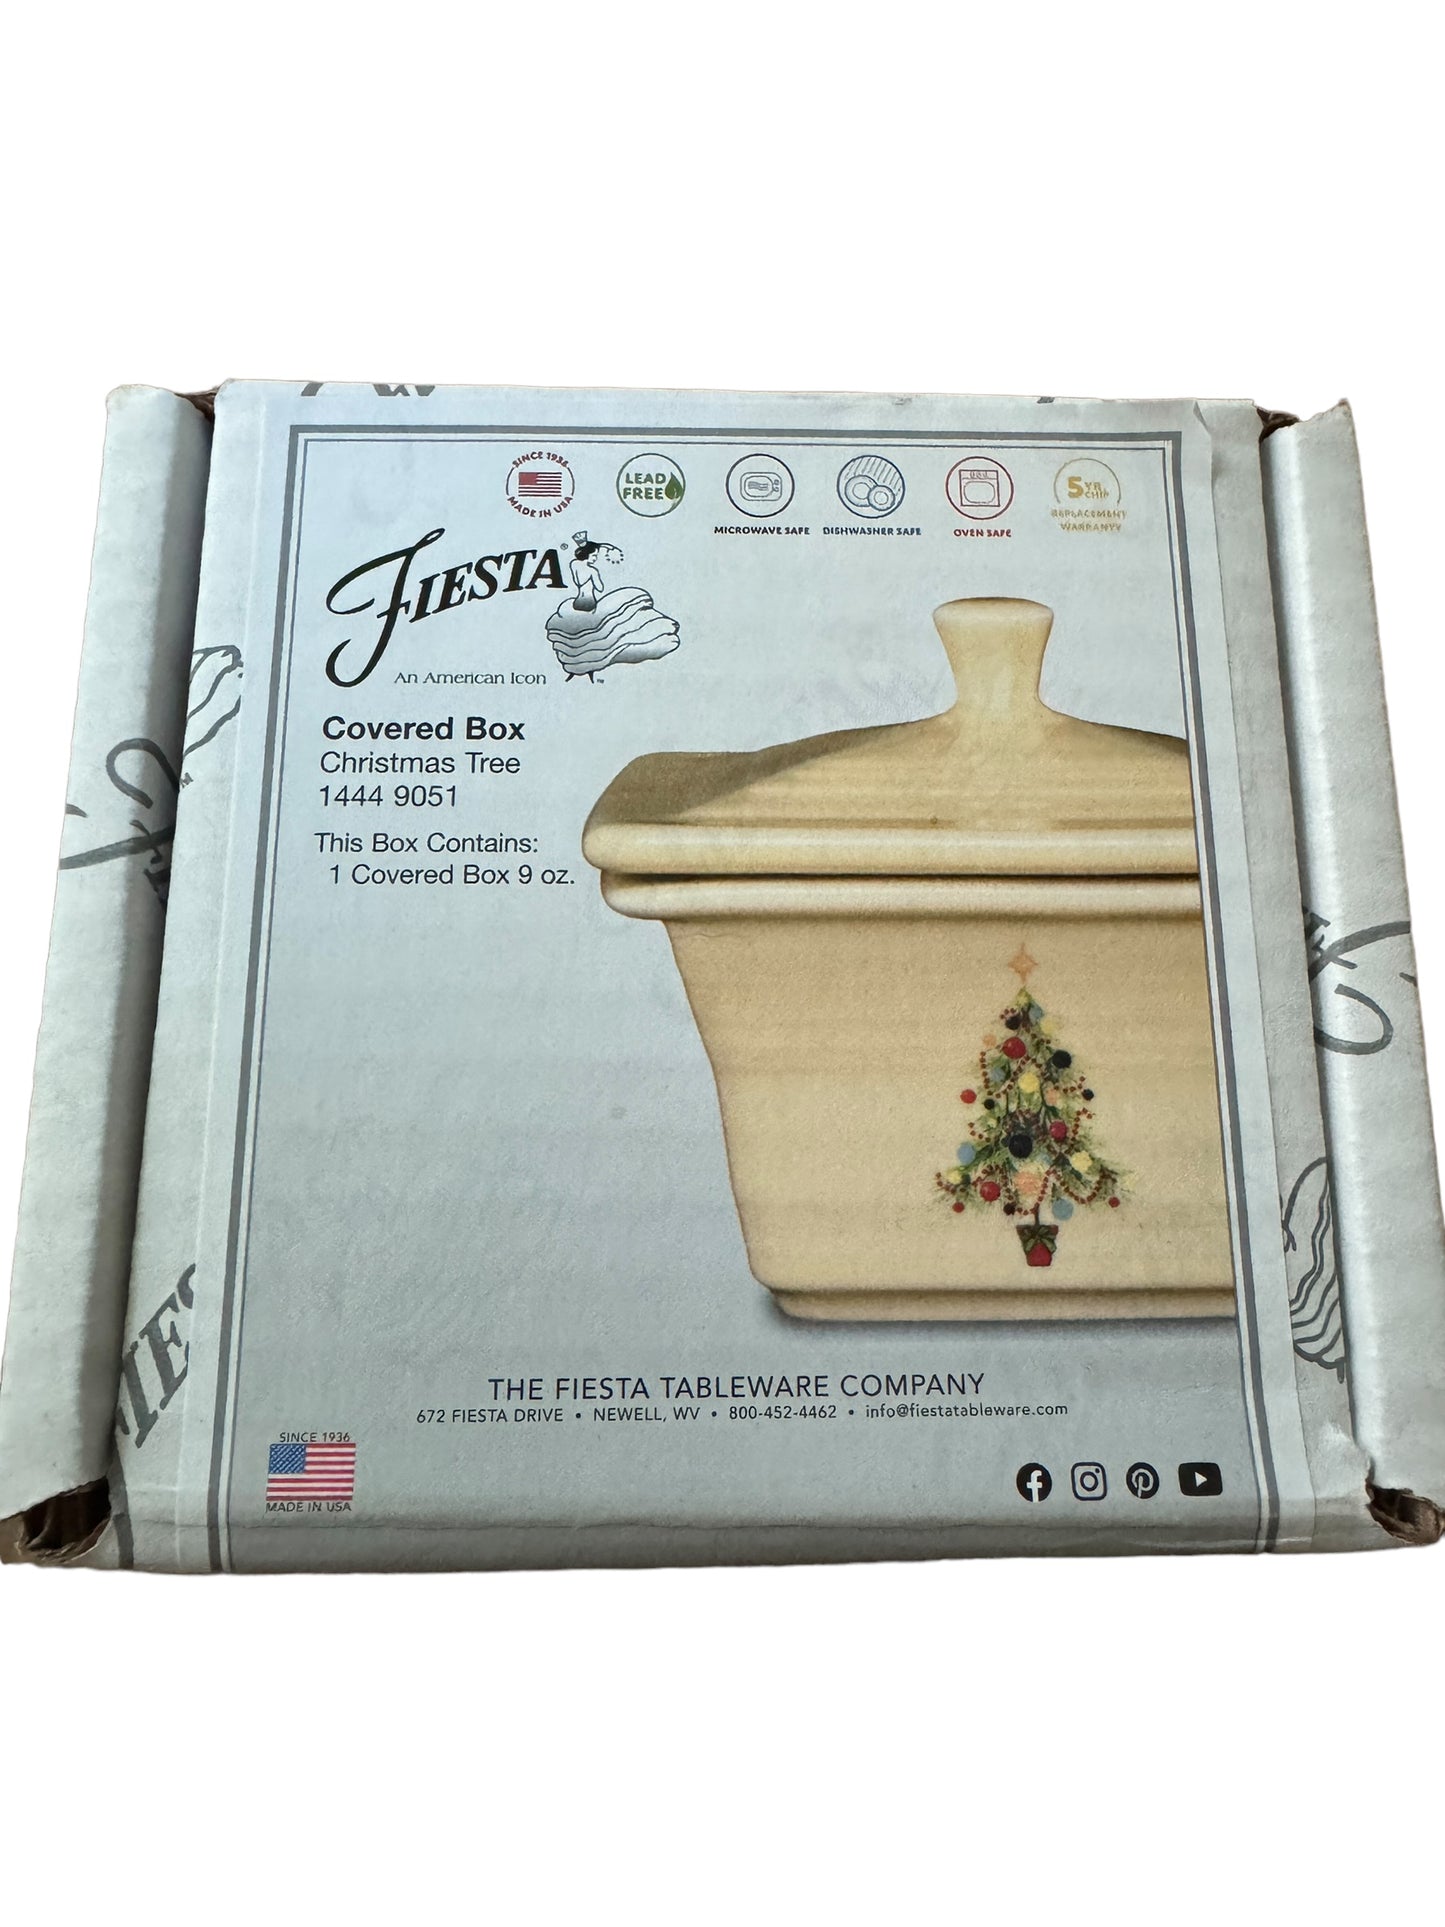 Fiesta Christmas Tree Decal Covered Gift Box in Ivory (Belk Box)